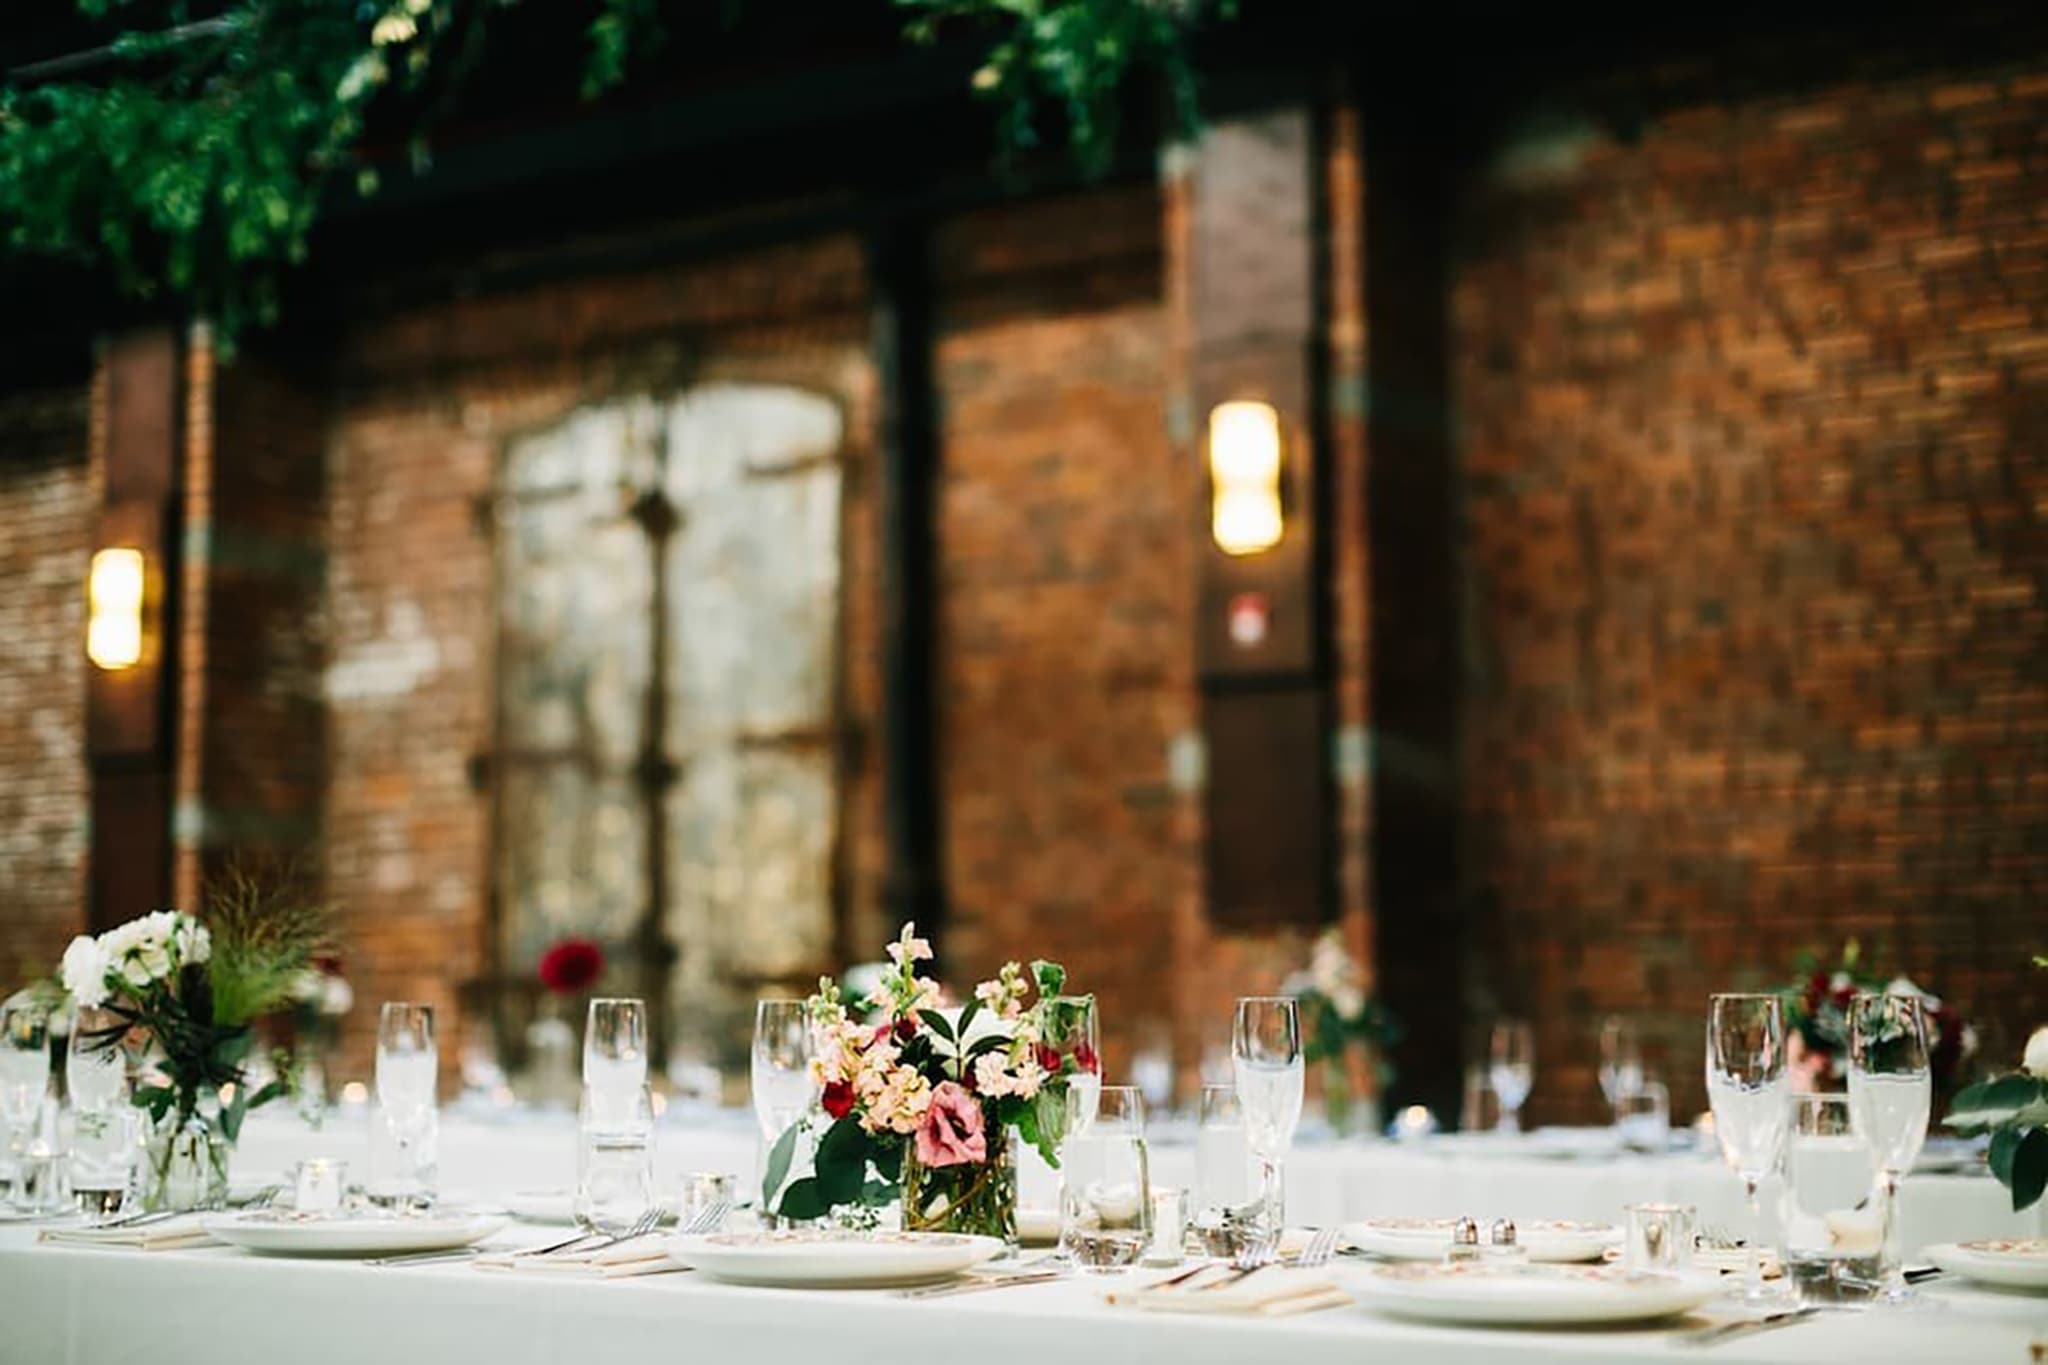 Close-up of wedding table with glassware, white linens, and a lush floral centerpiece.